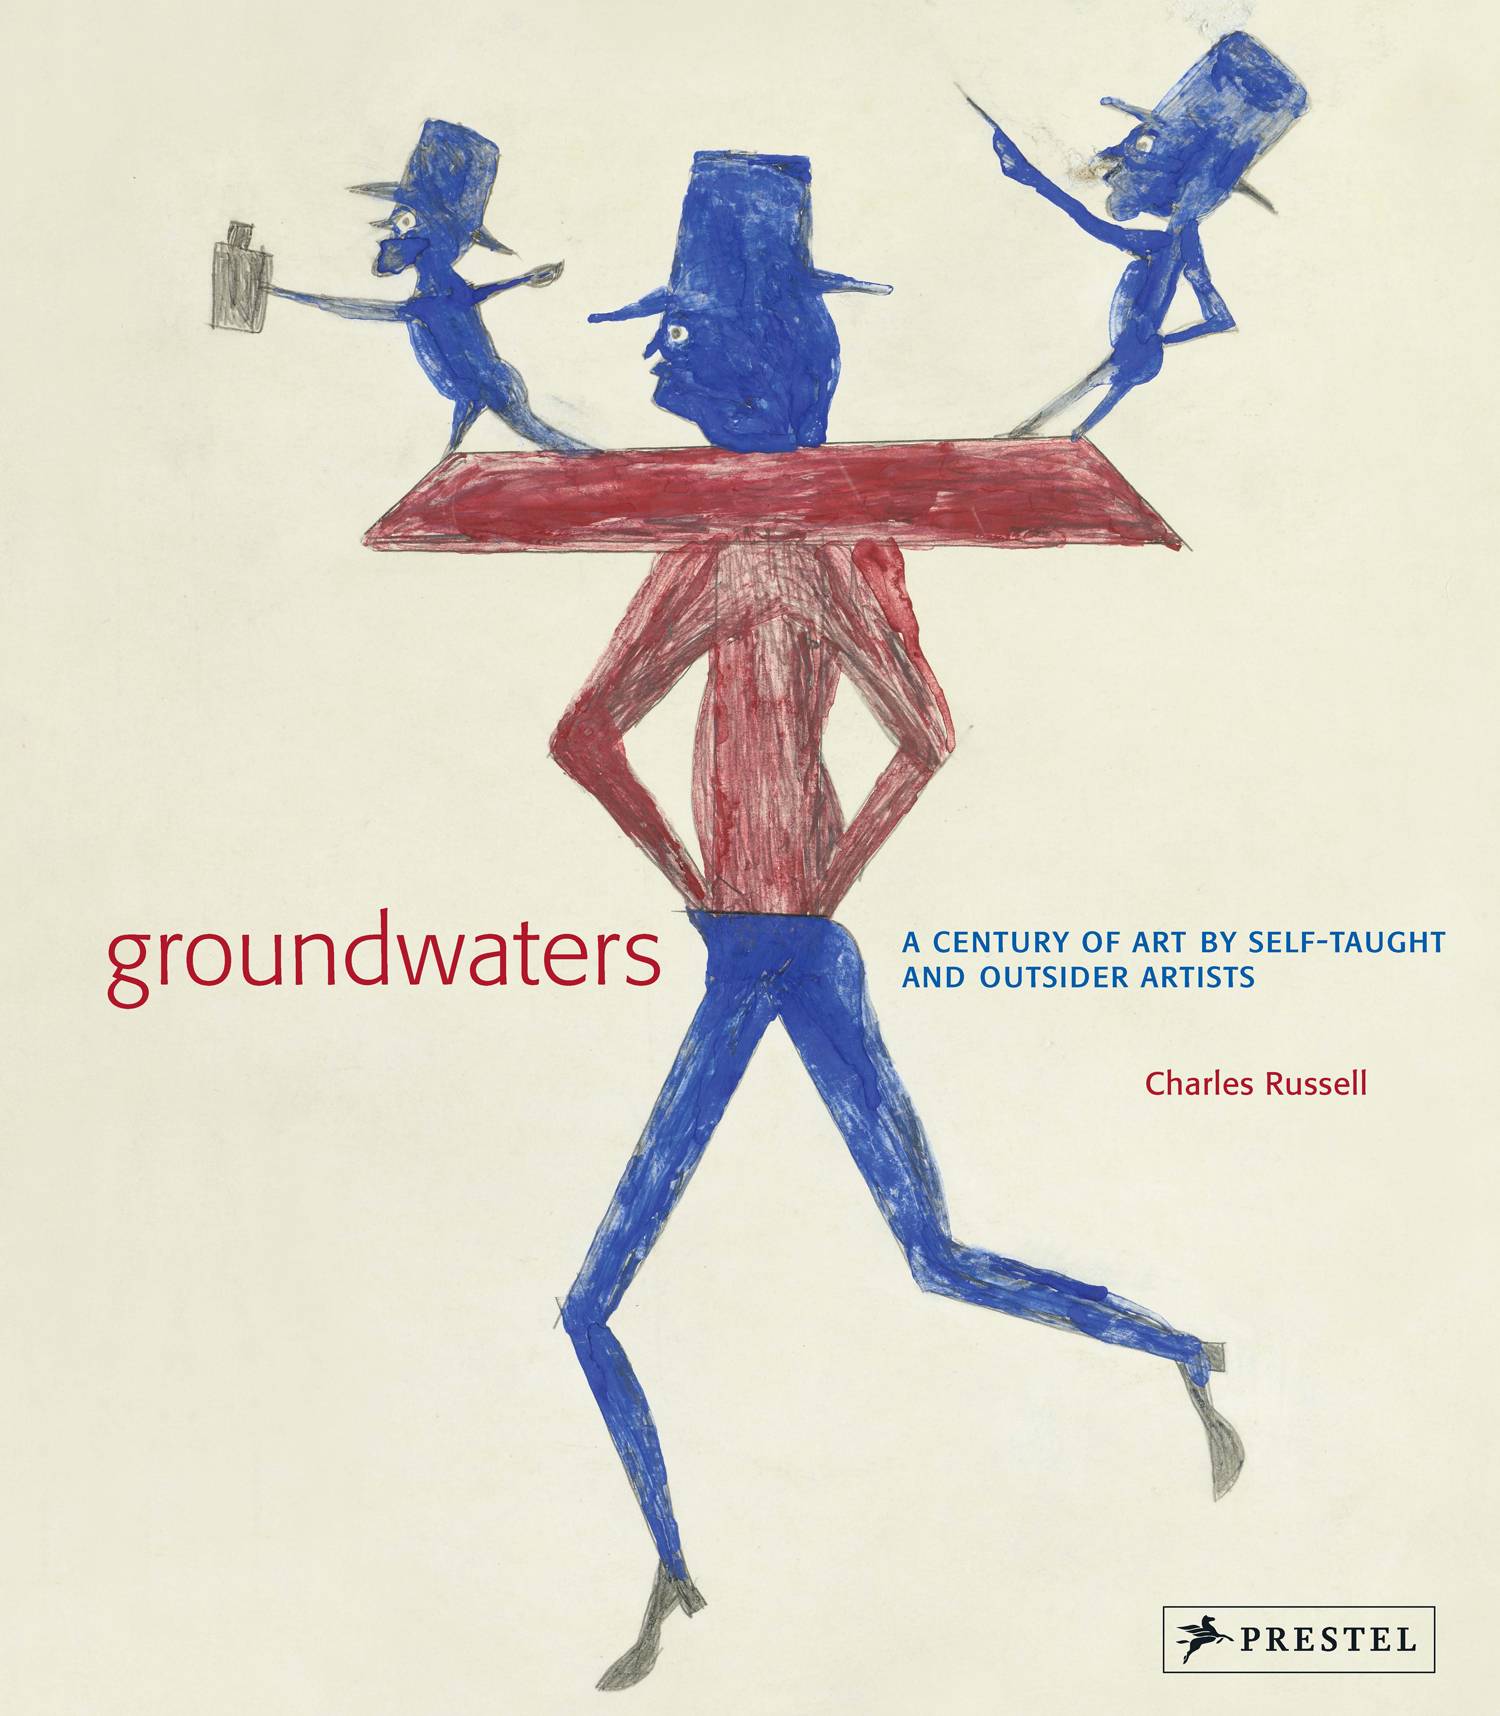 Groundwaters: a Century of Art by Self-Taught and Outsider Artists by Charles Russell